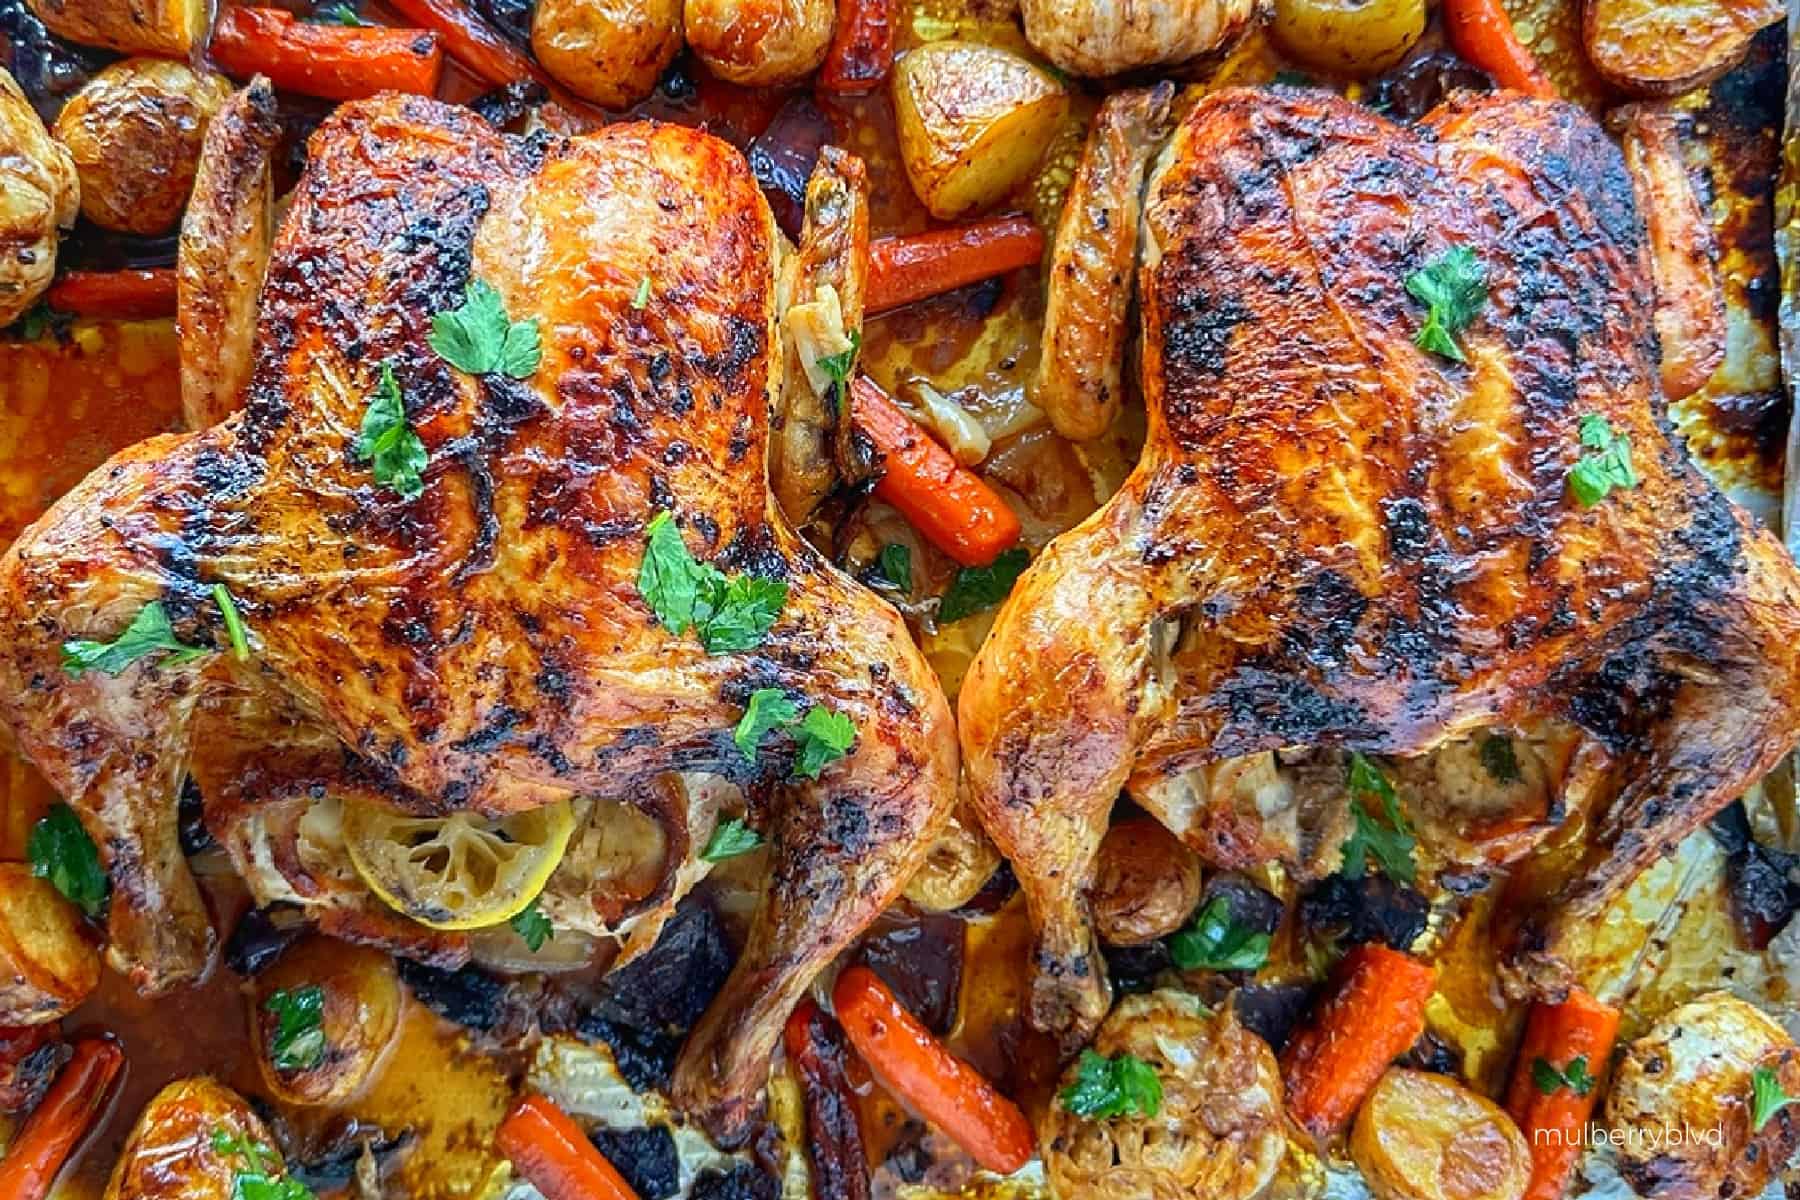 This is an image of two roasted chickens, on a baking tray with roasted potatoes, carrots, onions, and garlic. The entire tray is sprinkled with fresh parsley.